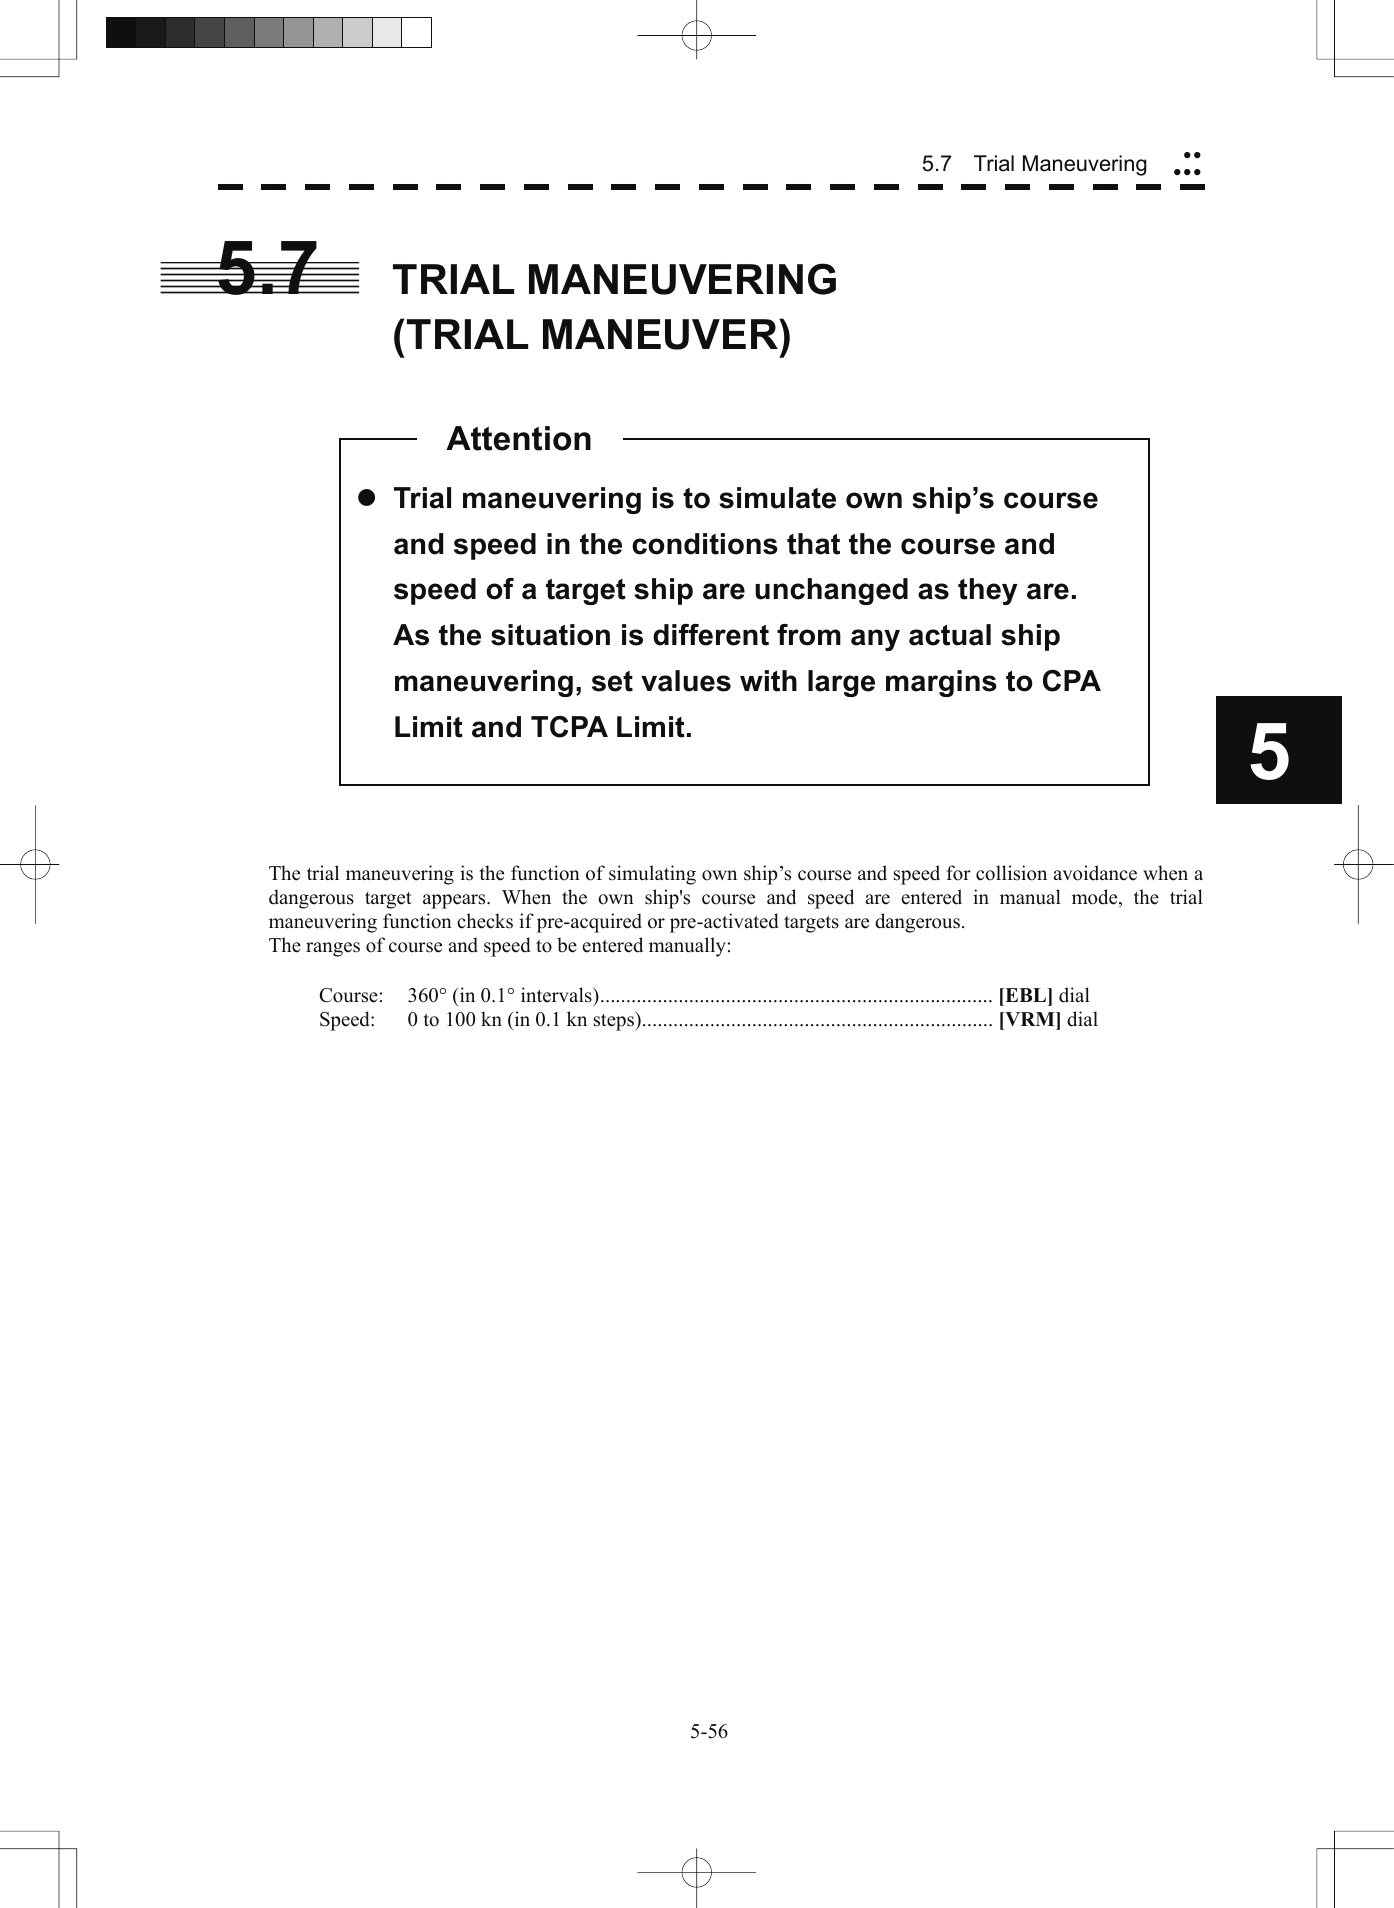  5.7   Trial Maneuvering yyyyy5.7  TRIAL MANEUVERING (TRIAL MANEUVER)    5 z Trial maneuvering is to simulate own ship’s course and speed in the conditions that the course and speed of a target ship are unchanged as they are.   As the situation is different from any actual ship maneuvering, set values with large margins to CPA Limit and TCPA Limit. Attention                   The trial maneuvering is the function of simulating own ship’s course and speed for collision avoidance when a dangerous target appears. When the own ship&apos;s course and speed are entered in manual mode, the trial maneuvering function checks if pre-acquired or pre-activated targets are dangerous. The ranges of course and speed to be entered manually:  Course: 360° (in 0.1° intervals)........................................................................... [EBL] dial Speed:  0 to 100 kn (in 0.1 kn steps)................................................................... [VRM] dial   5-56 